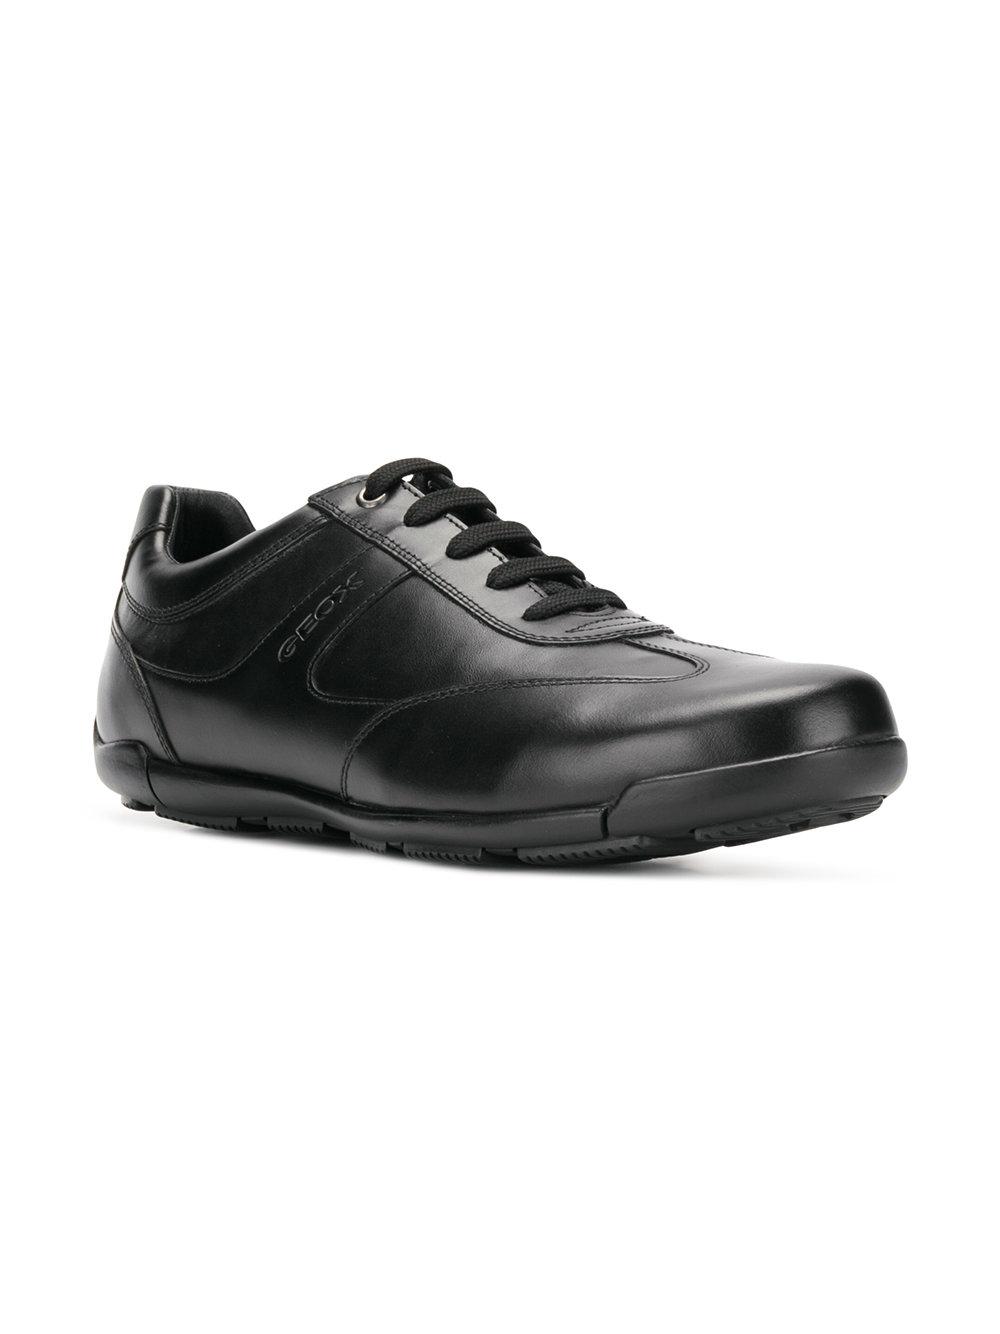 Geox Leather Edgware Sneakers in Black for Men - Lyst